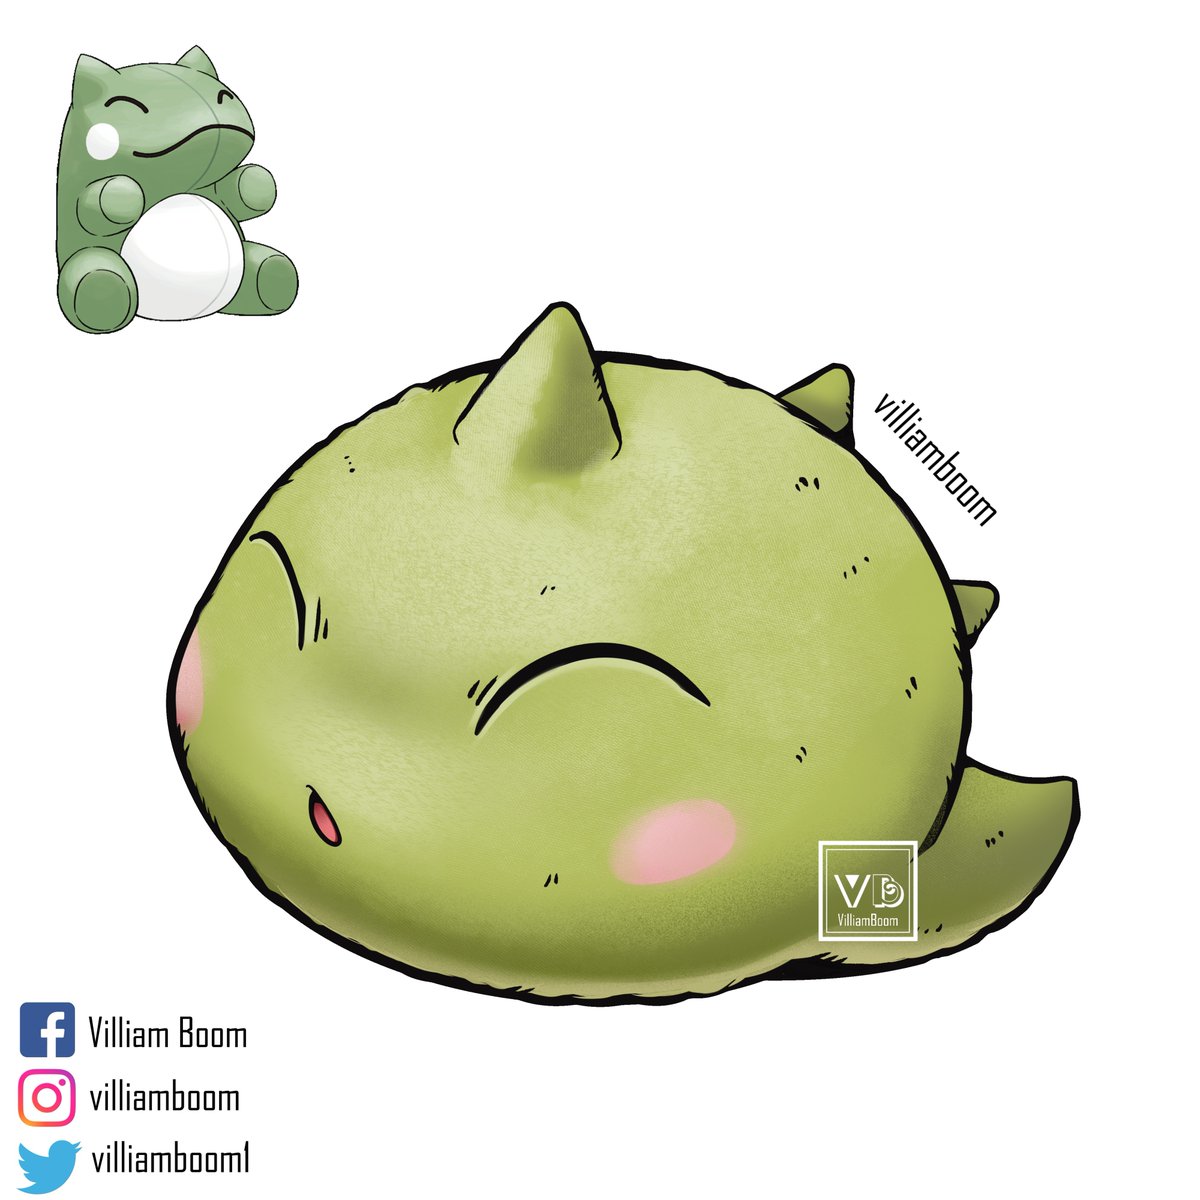 Commission done for @spikeshade !! The Substitute is now a Baby Digimon! Squishmon Fresh Free Type This freshly hatched digimon is covered in soft fur and has no bones. It can squash and stretch to hide in any small space #pokemon #pokemonart #fakemon #pokemonfusion…